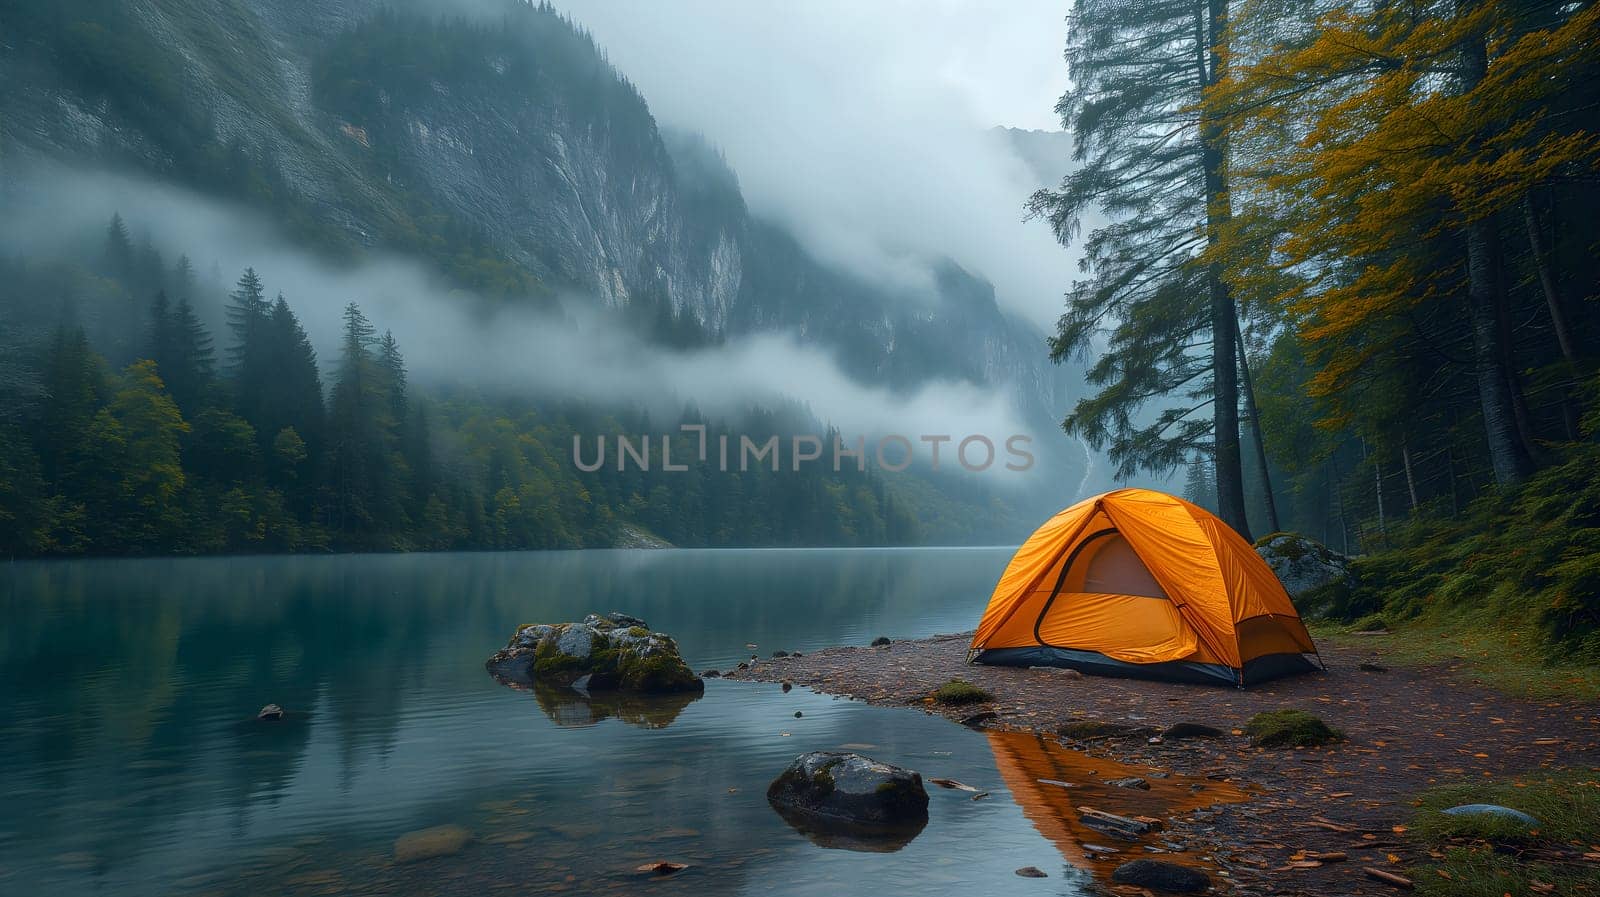 Close-up of a tent in the foreground and mountains with fog in the background with a lake or river in the foreground. Neural network generated image. Not based on any actual scene or pattern.